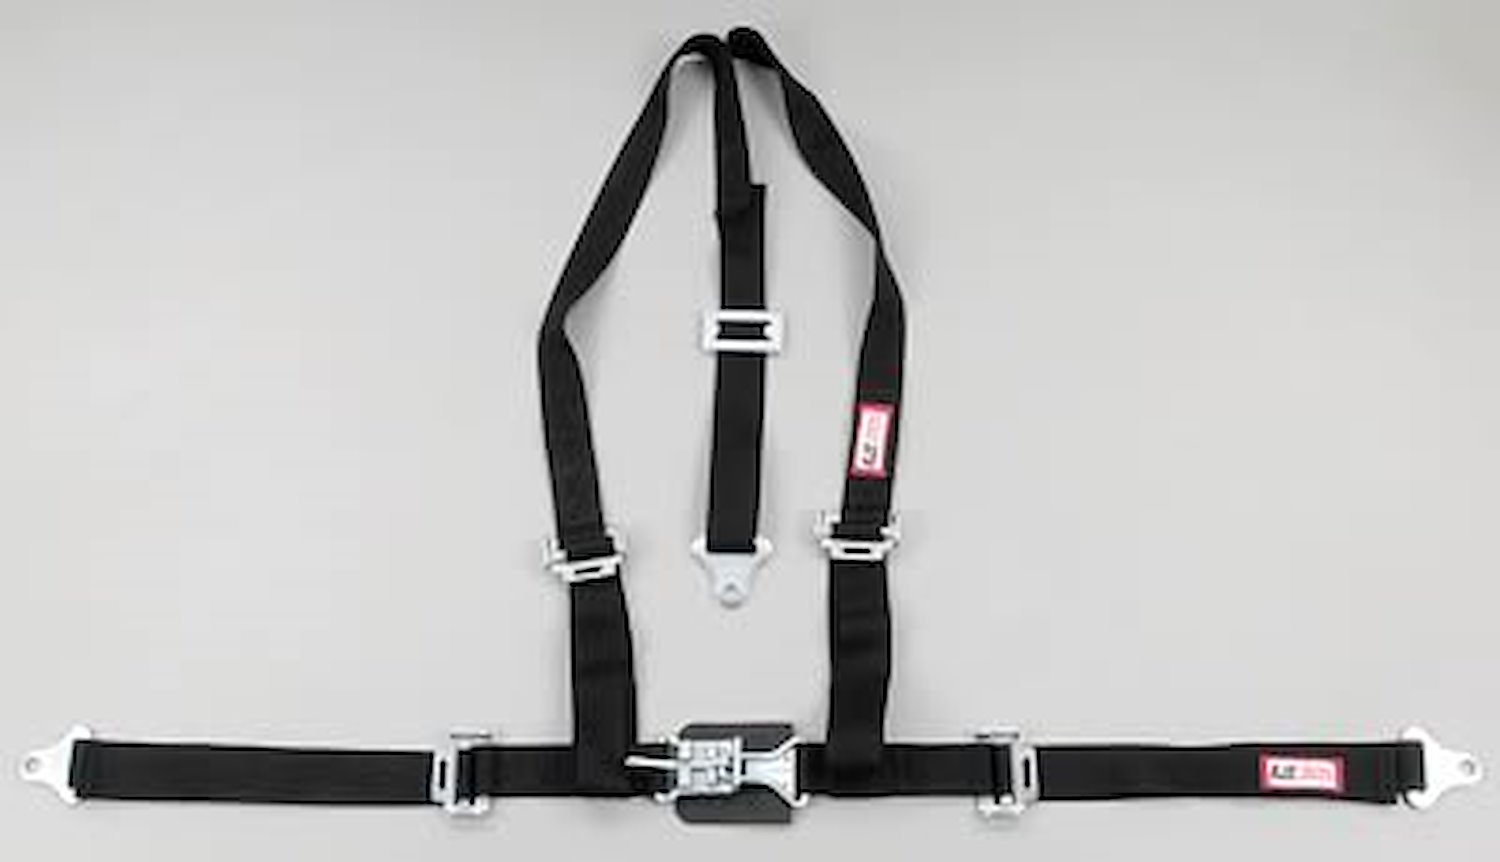 NON-SFI L&L HARNESS 2 PULL UP Lap Belt BOLT SEWN IN 2 S.H. INDIVIDUAL FLOOR Mount w/STERNUM STRAP WRAP/BOLT YELLOW